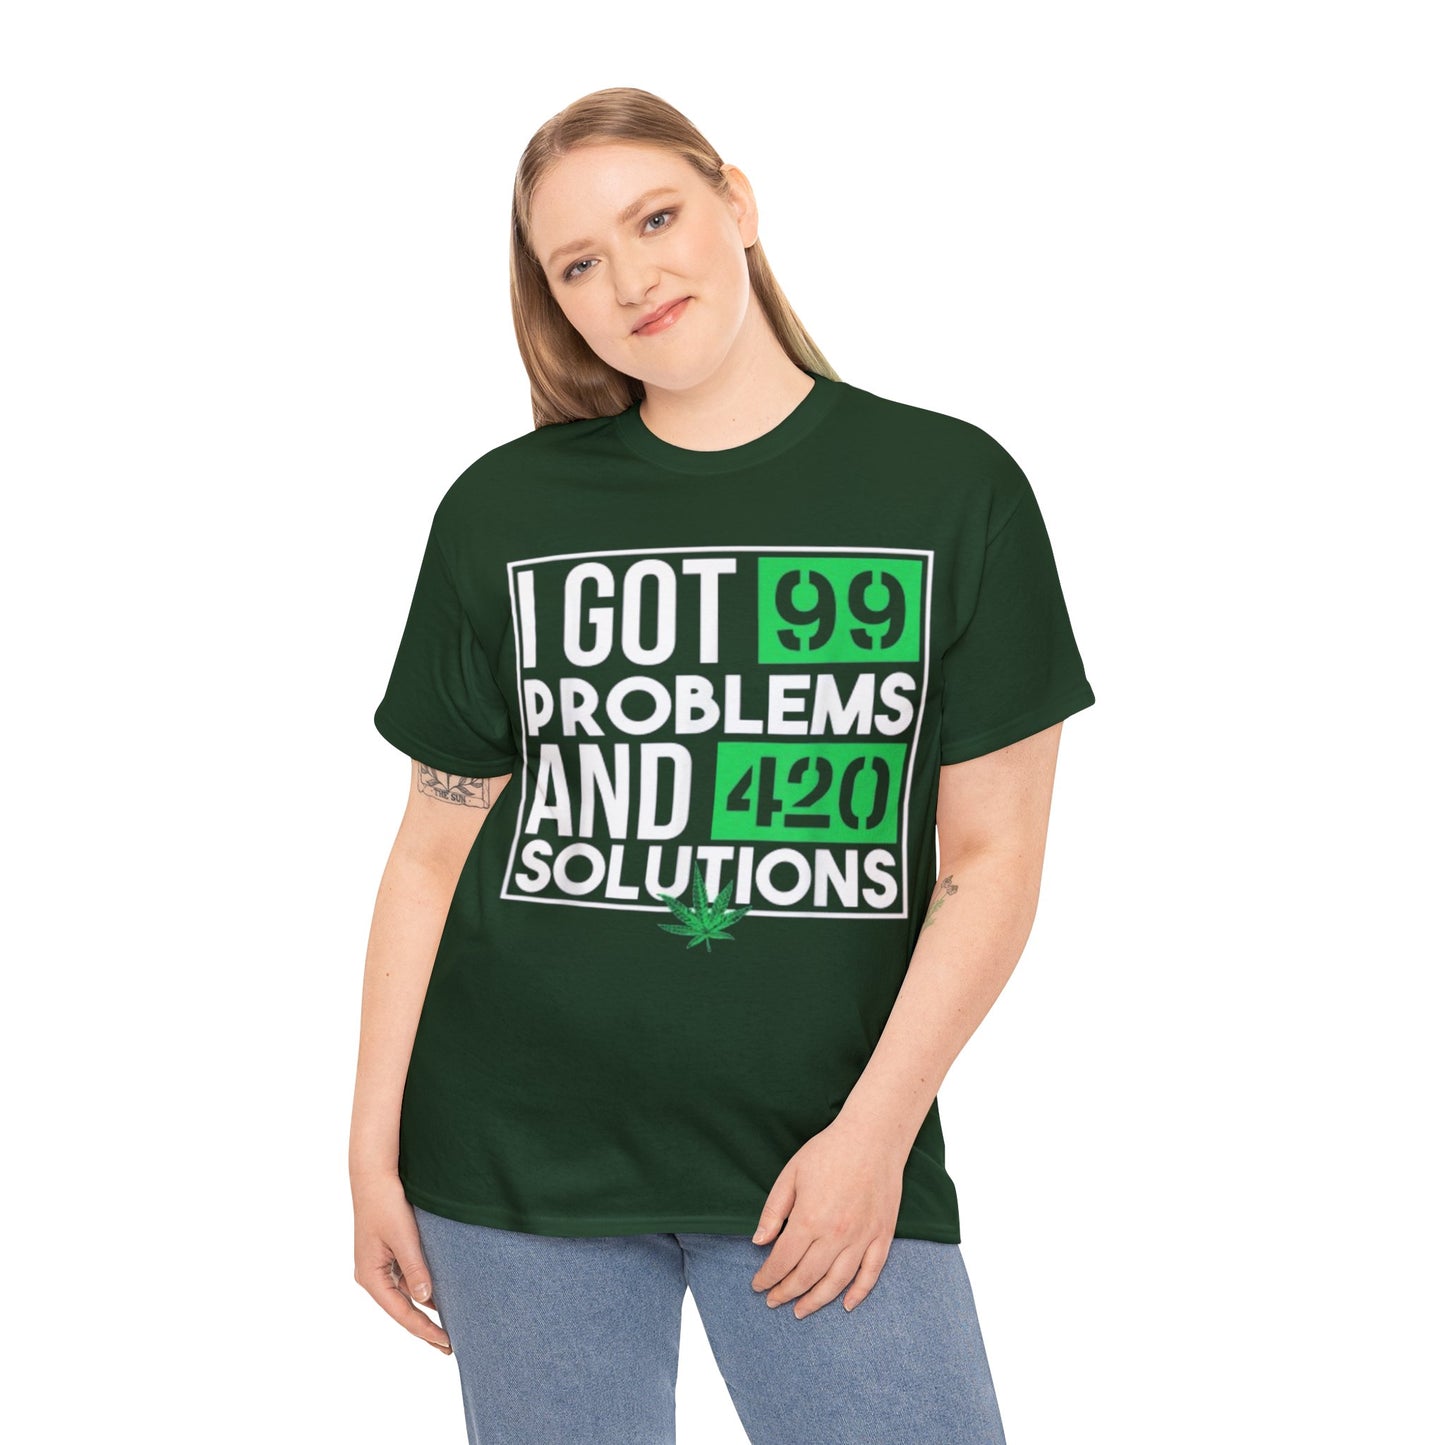 420 Solutions Tee